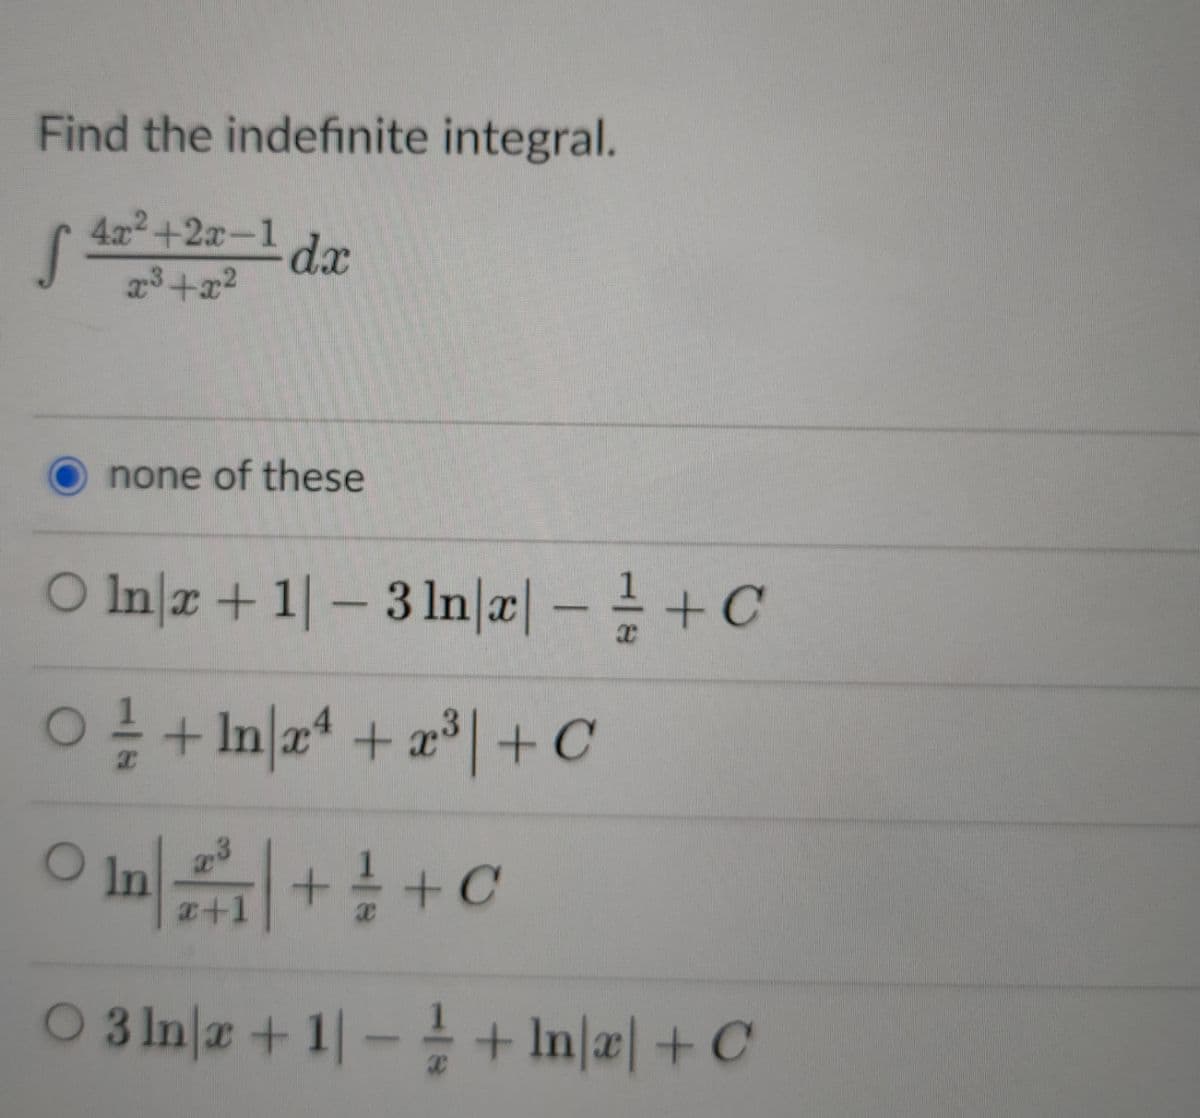 Find the indefinite integral.
4.x2+2x-1
dx
none of these
O Imlz + 1|-31m|피-글 +C
O+ In|a + a*| + C
+1
O 3 Ina+1- + In|a+C
